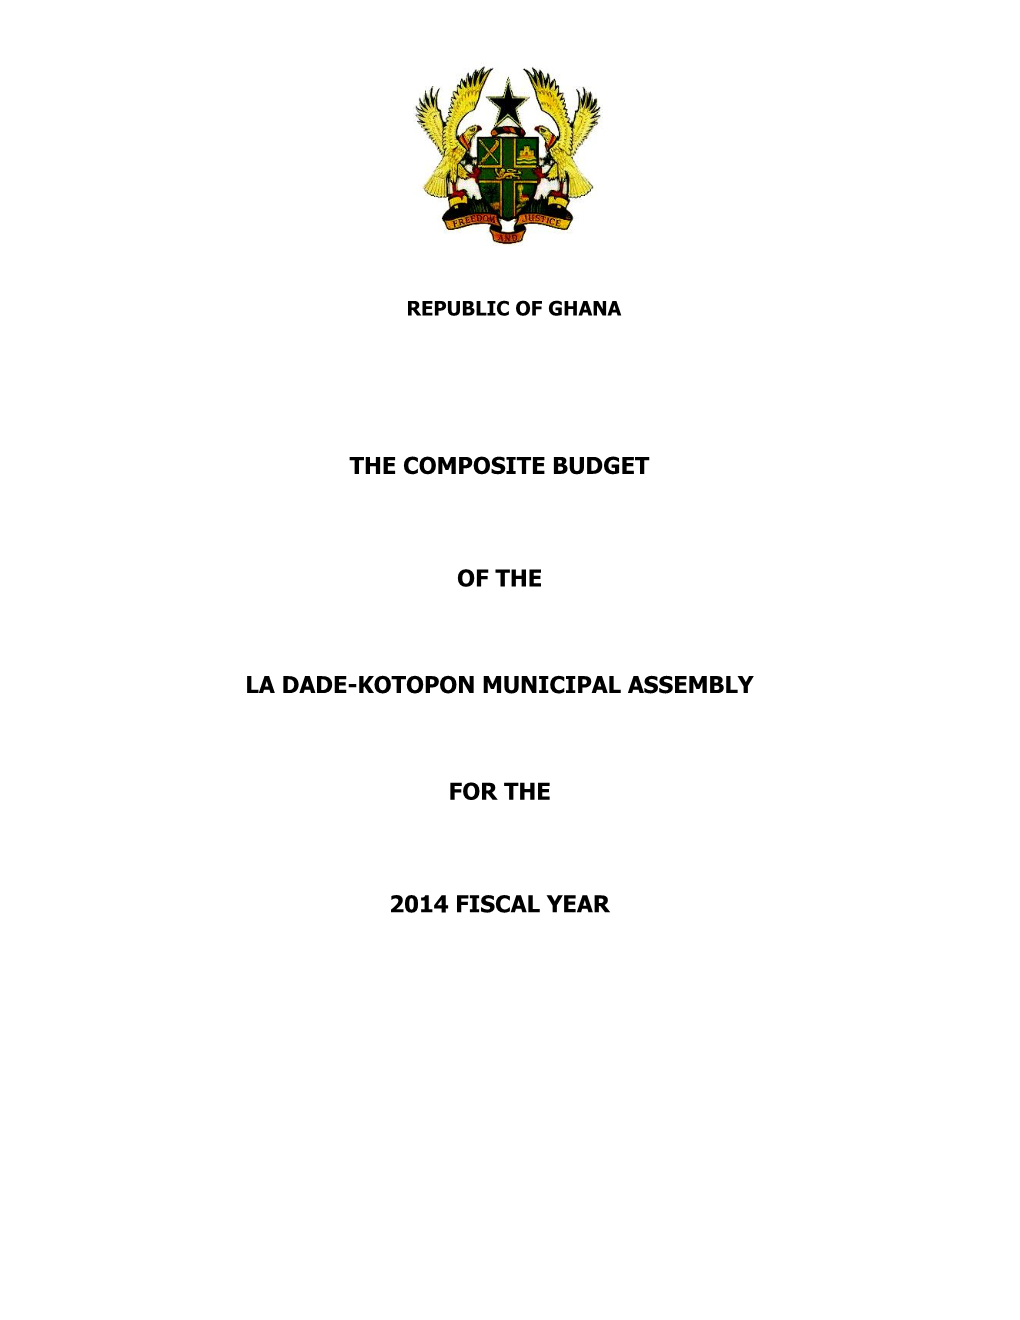 The Composite Budget of the La Dade-Kotopon Municipal Assembly